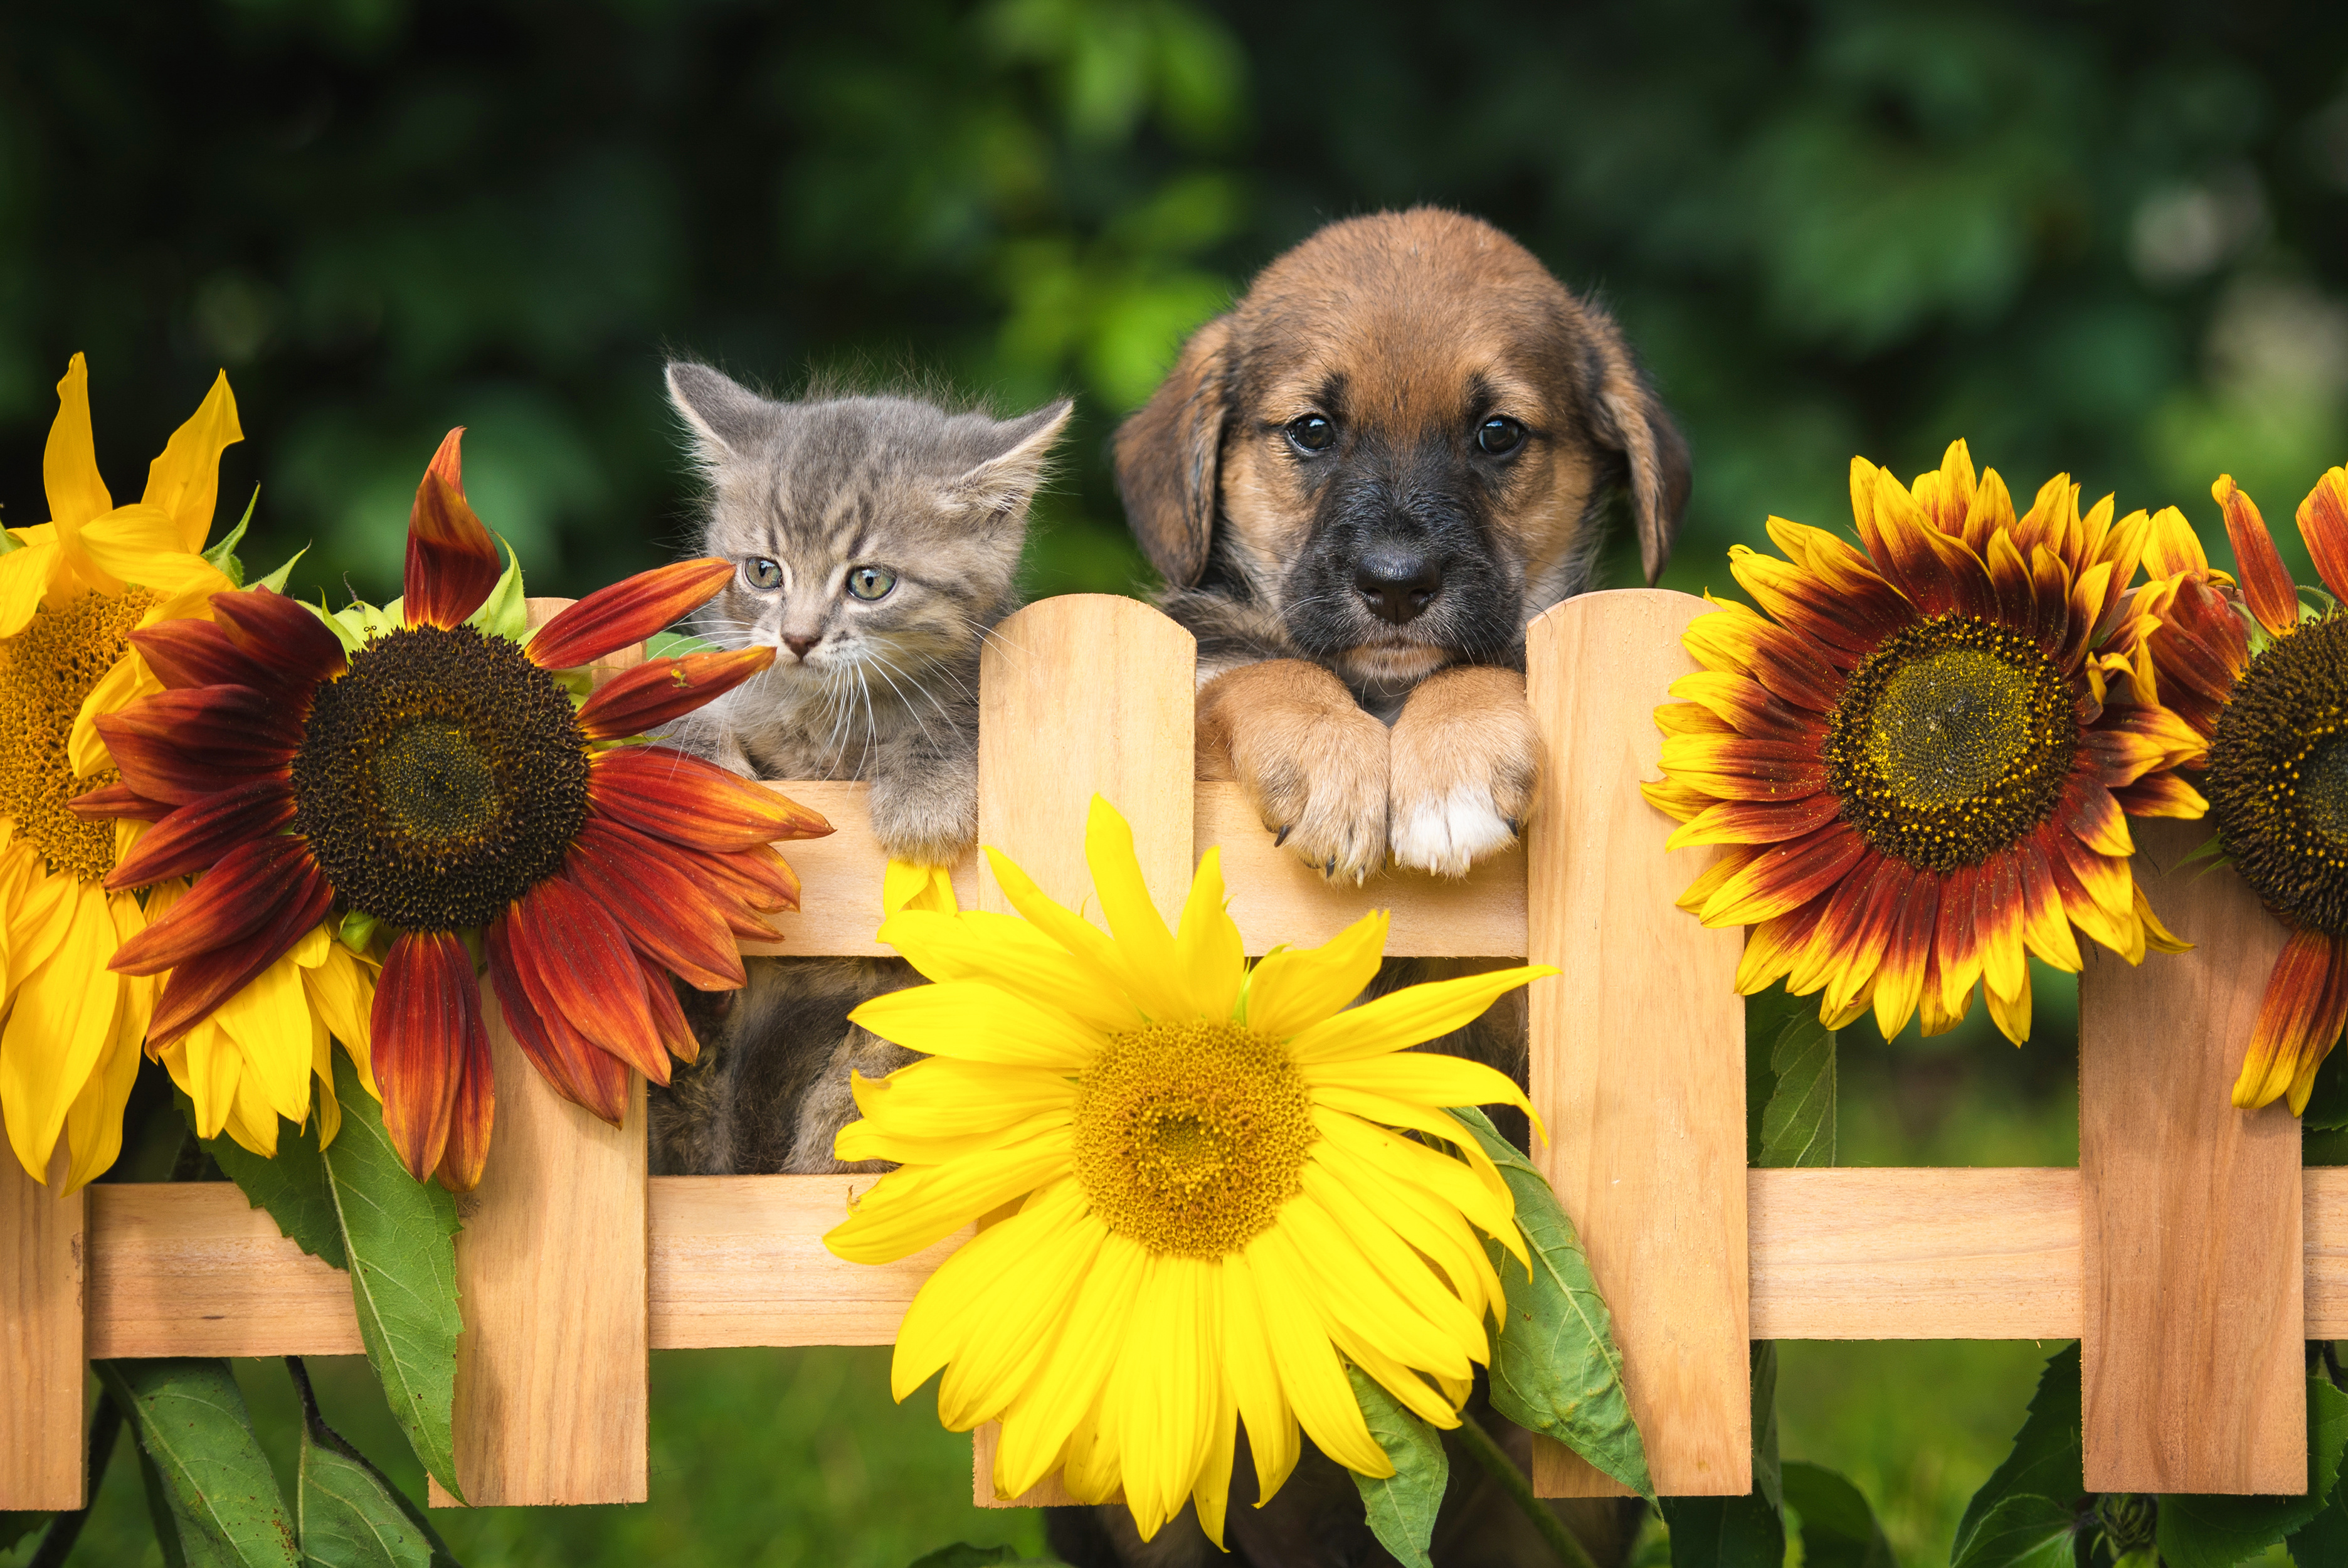 A puppy and kitten surrounded by sunflowers.